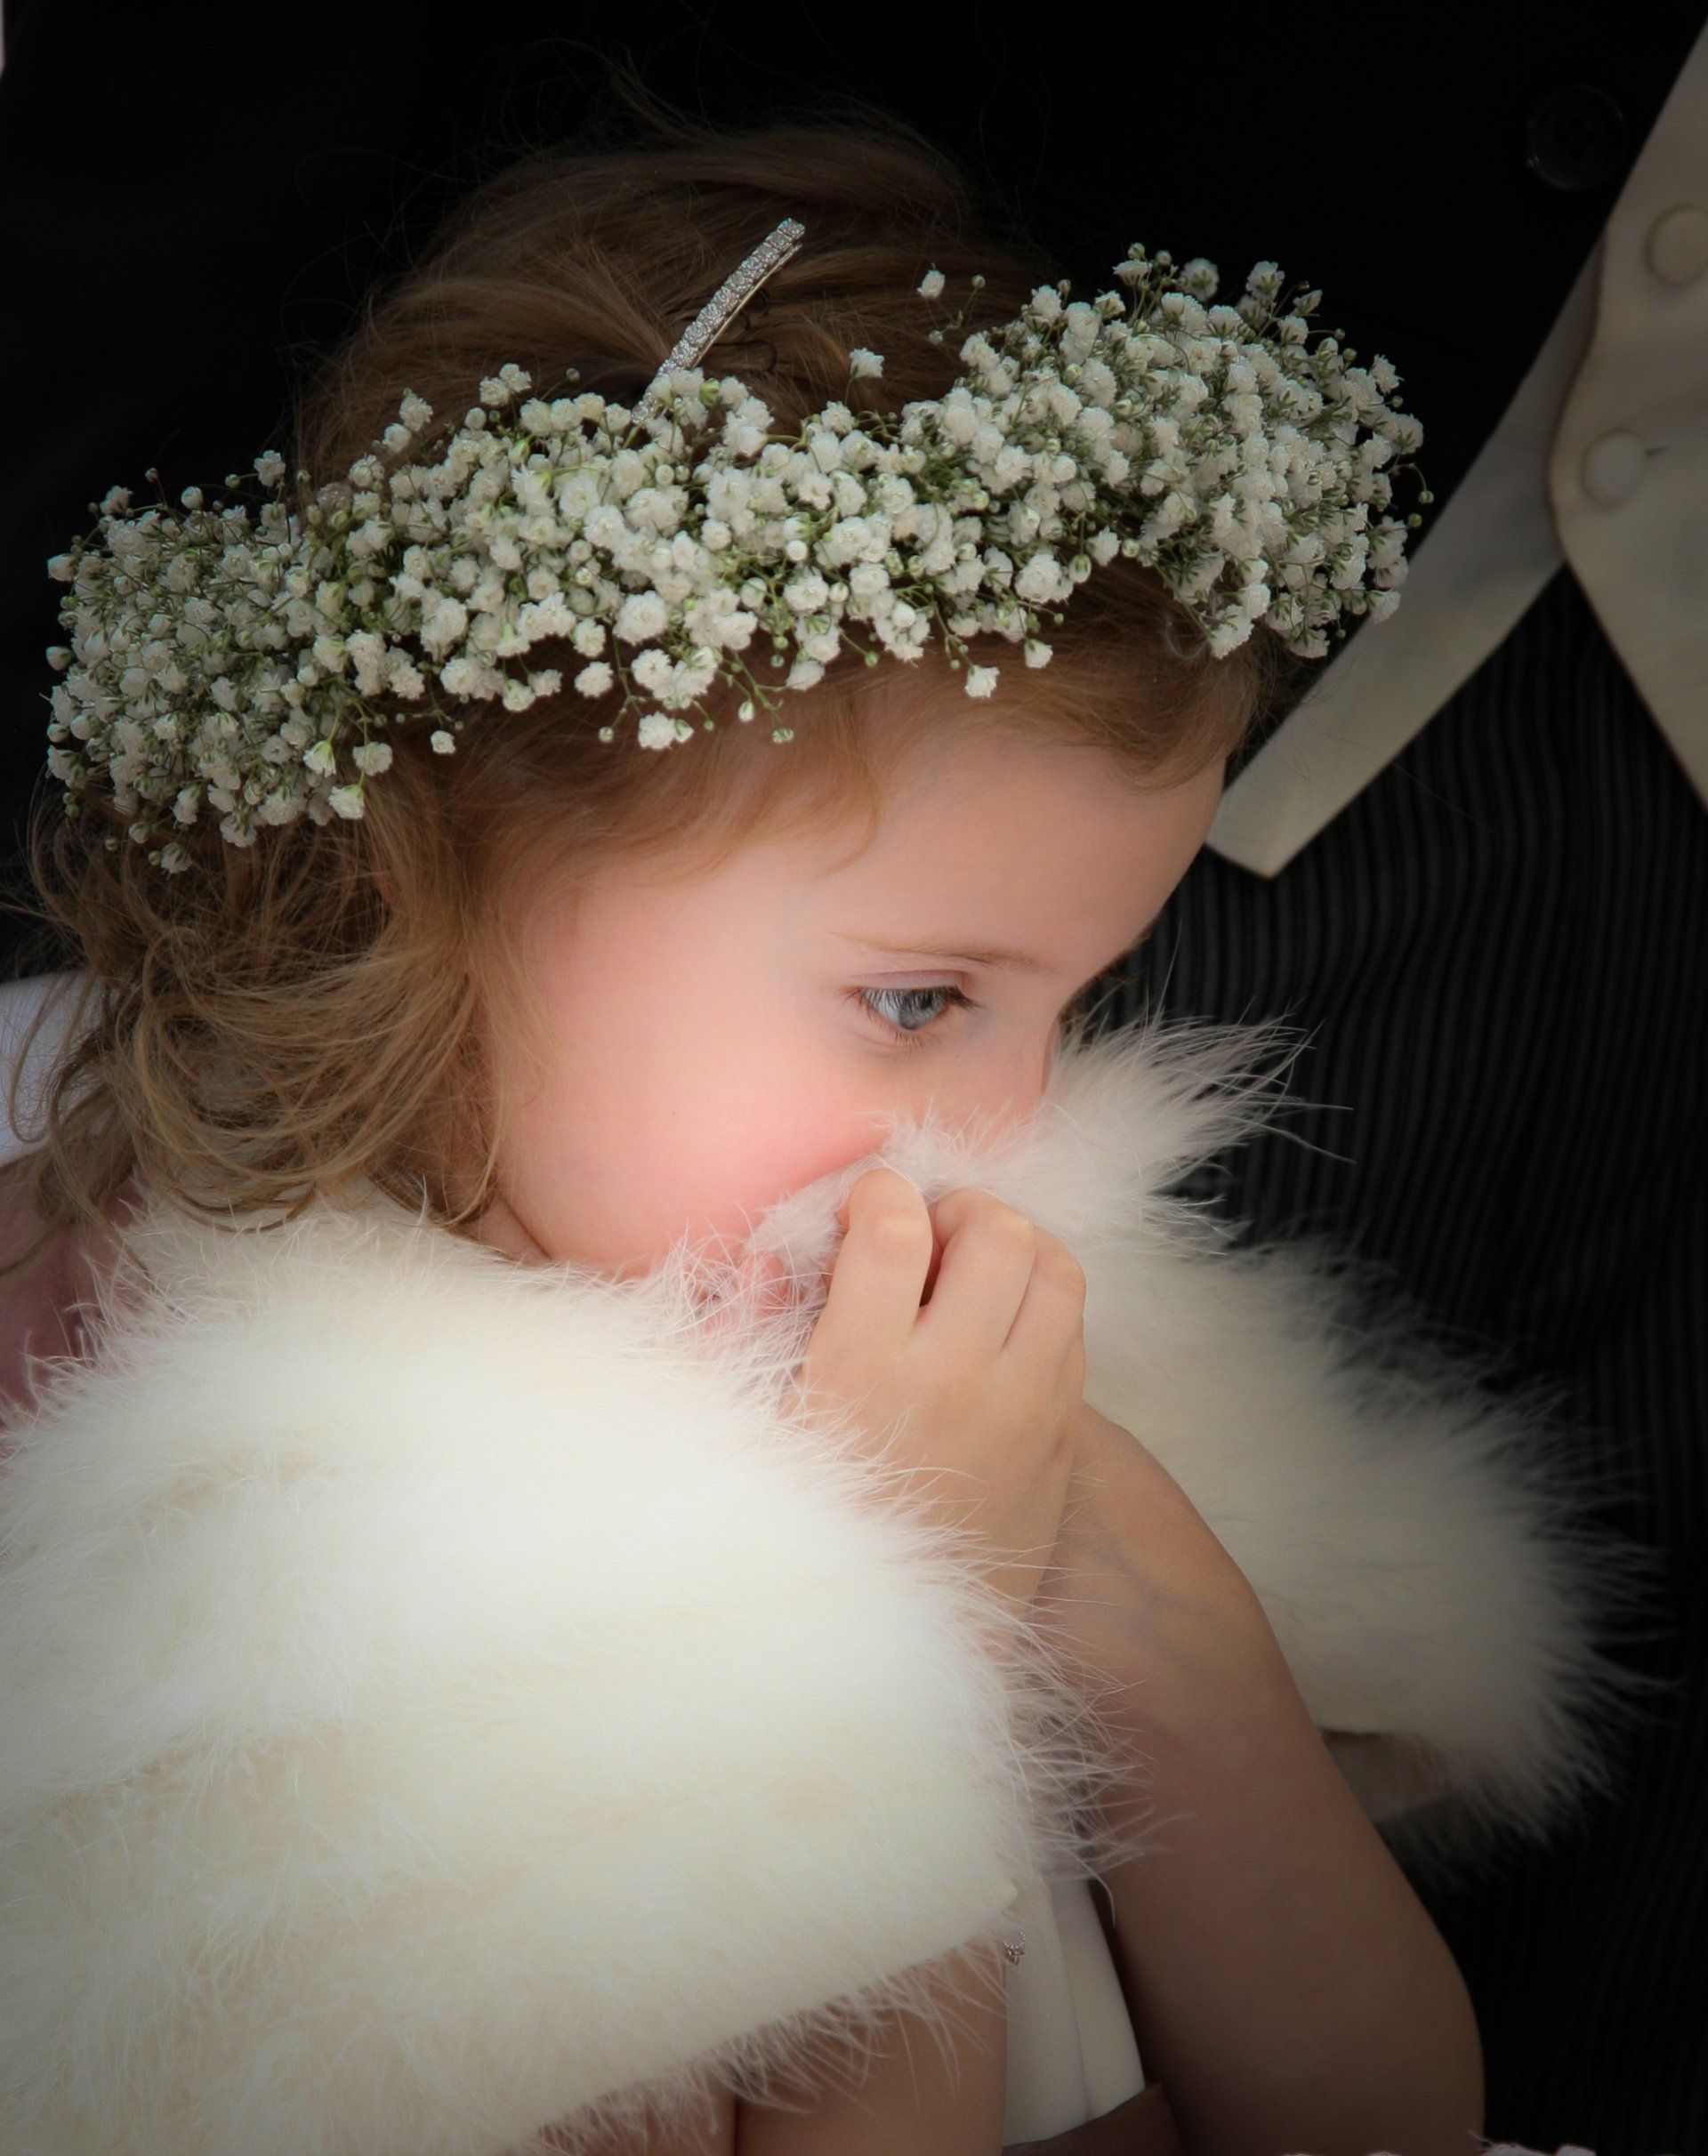 bridesmaid at wedding covering her nose with her fur stole, wedding photographer kate mitford taking the photo